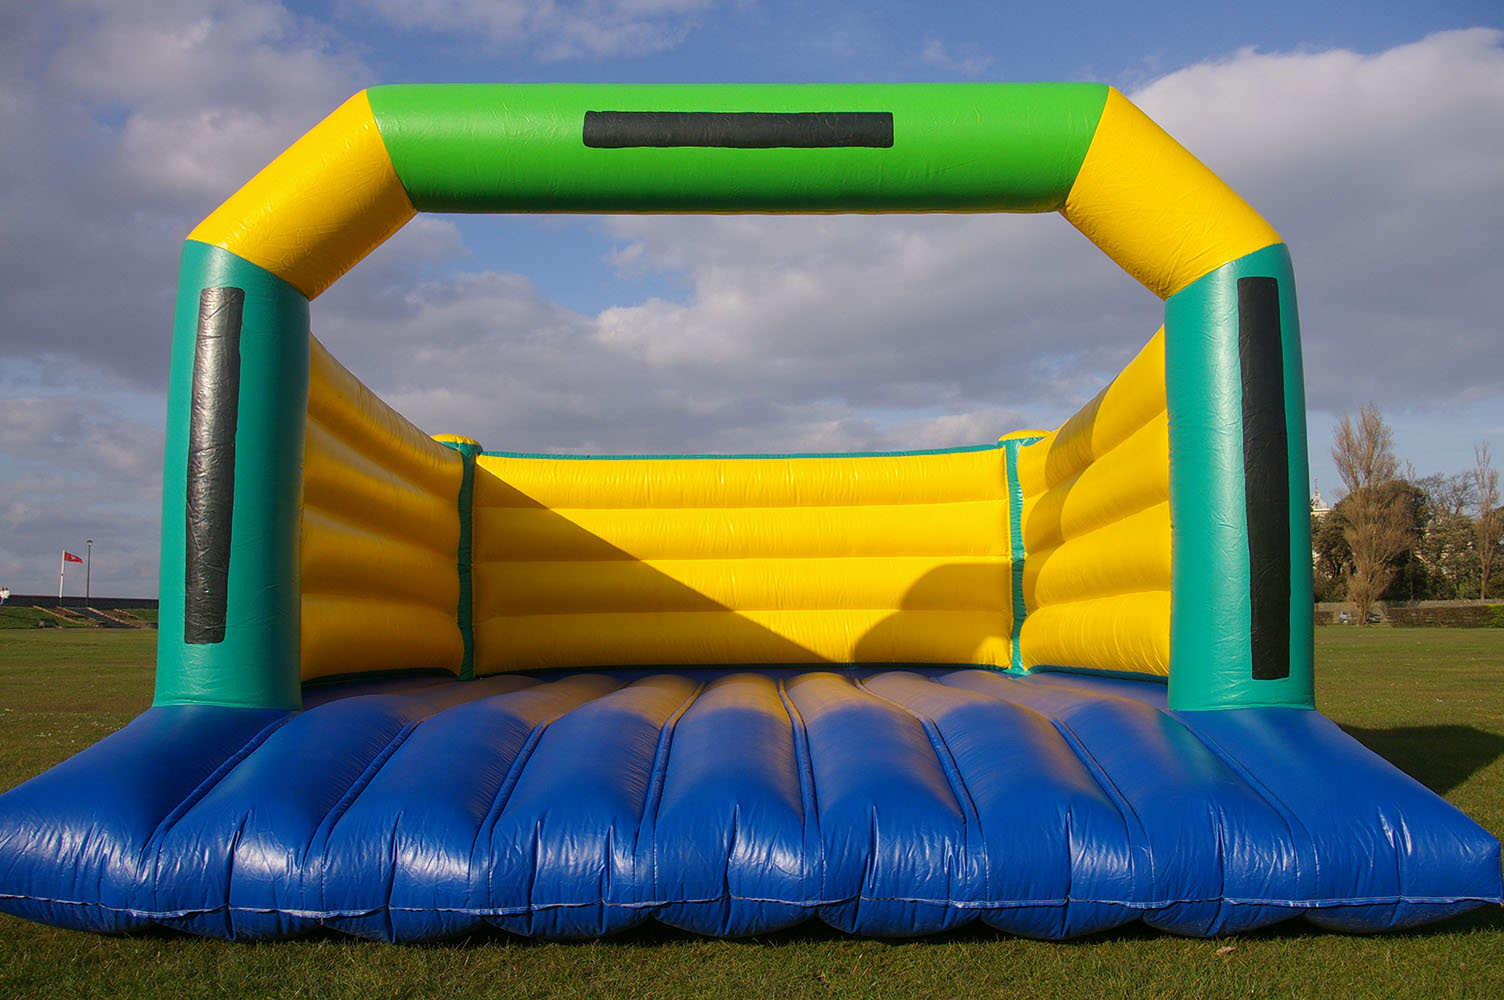 One of our larger standard bouncy castles, the Super Bouncy Castle like all of our others, is perfect for personalising with themed banners. Great for parties in halls, gardens, fetes and school fairs. Suitable for all ages.